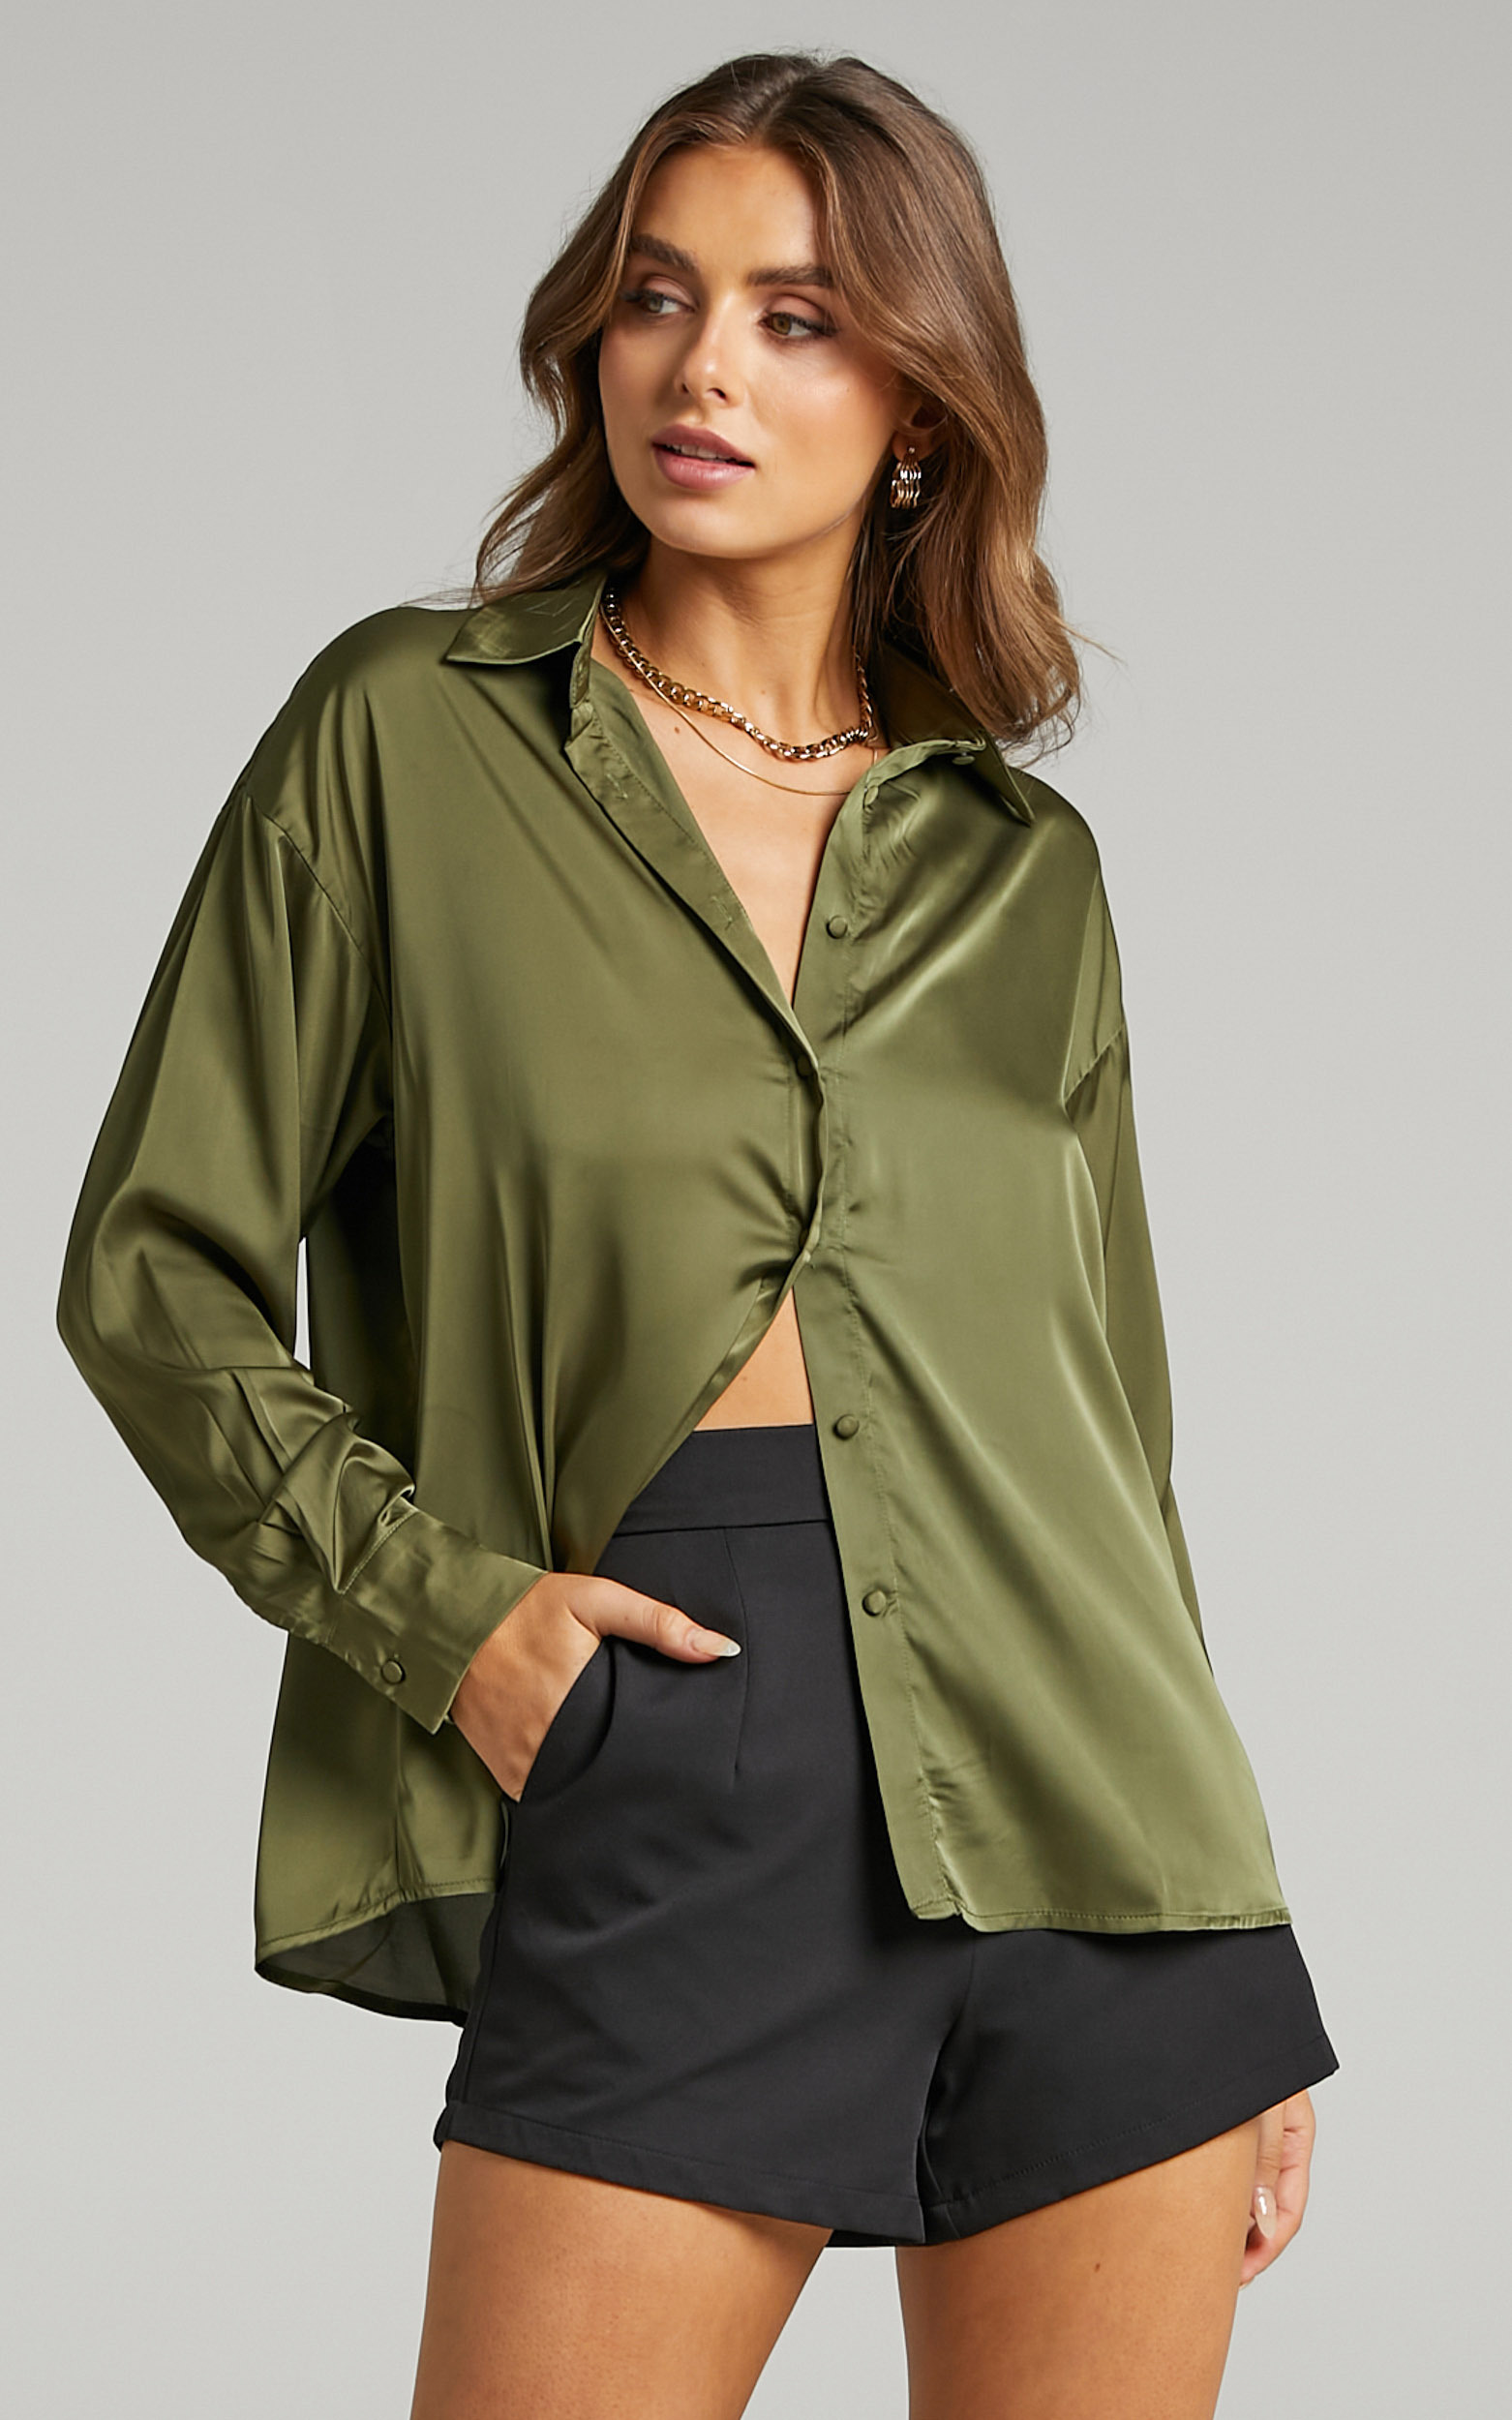 Blaze Oversized Relaxed Shirt in Olive Satin - 06, GRN2, hi-res image number null